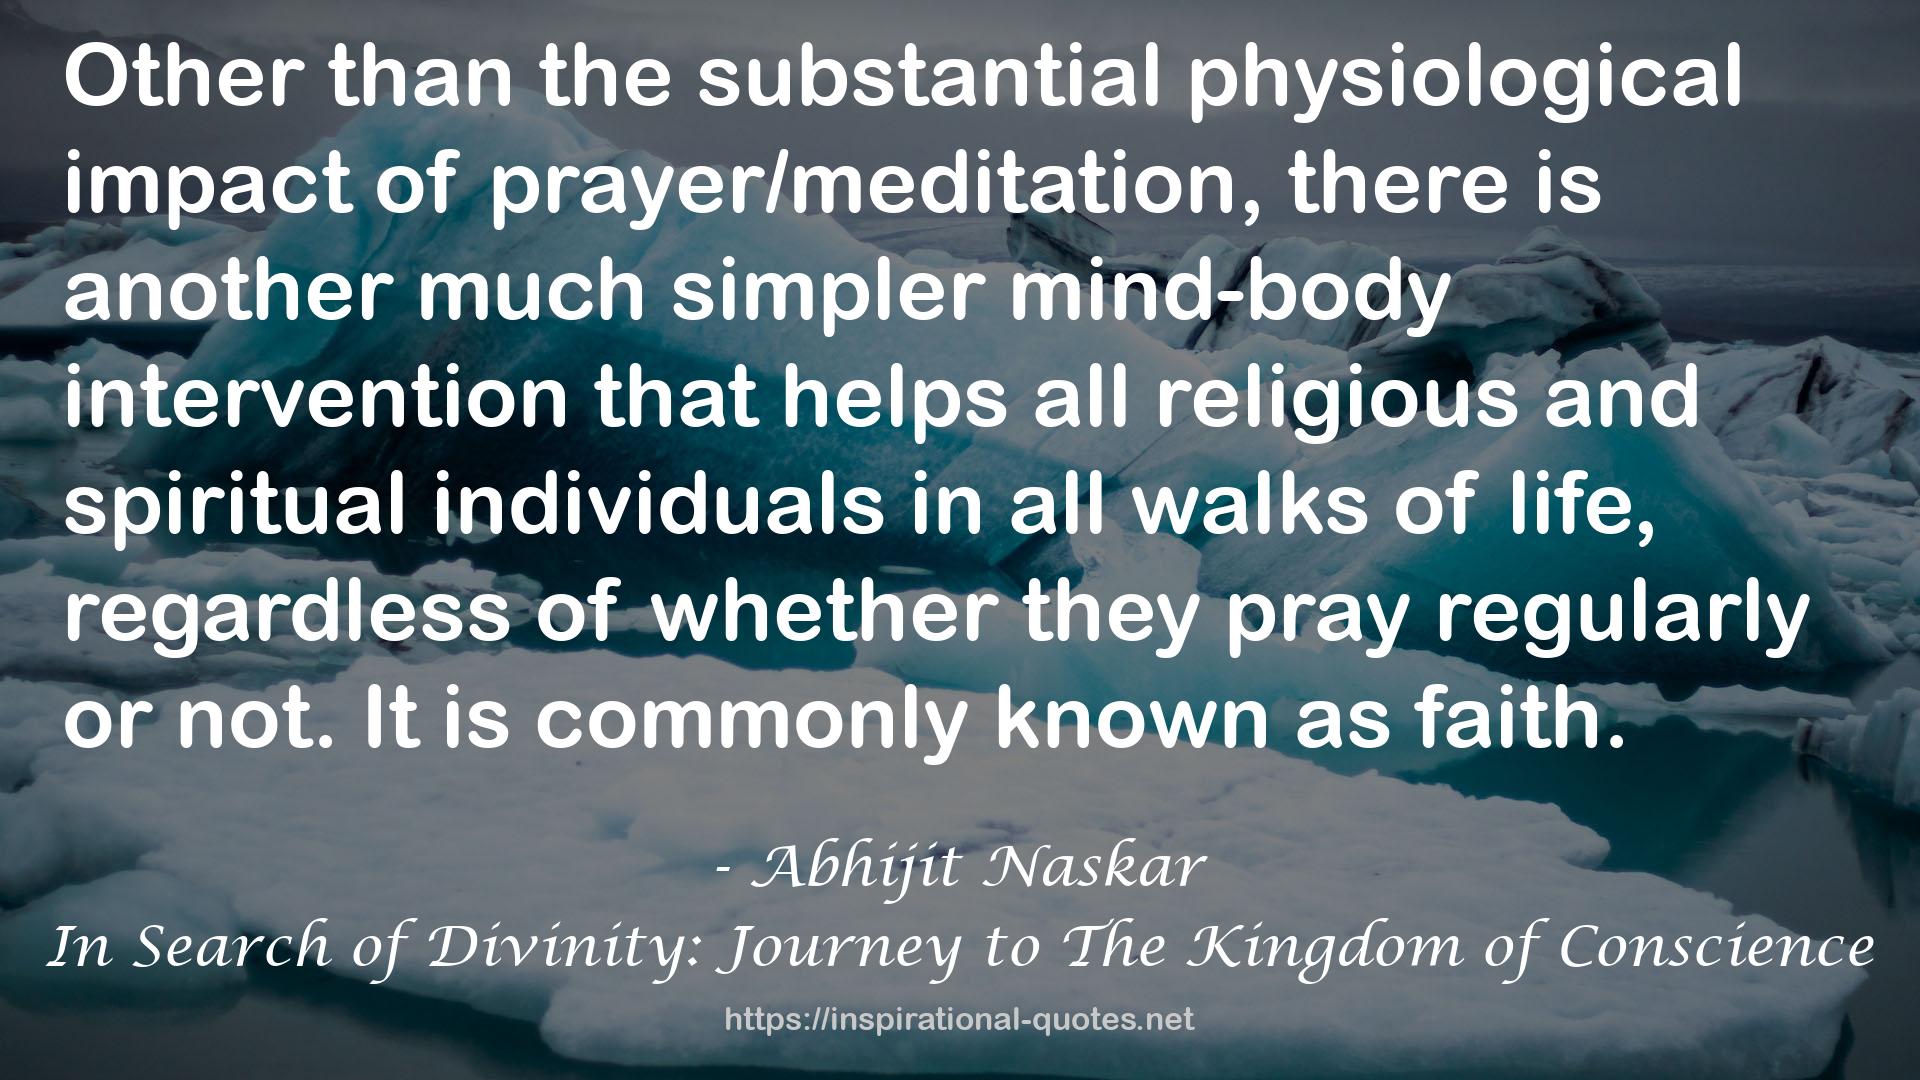 In Search of Divinity: Journey to The Kingdom of Conscience QUOTES